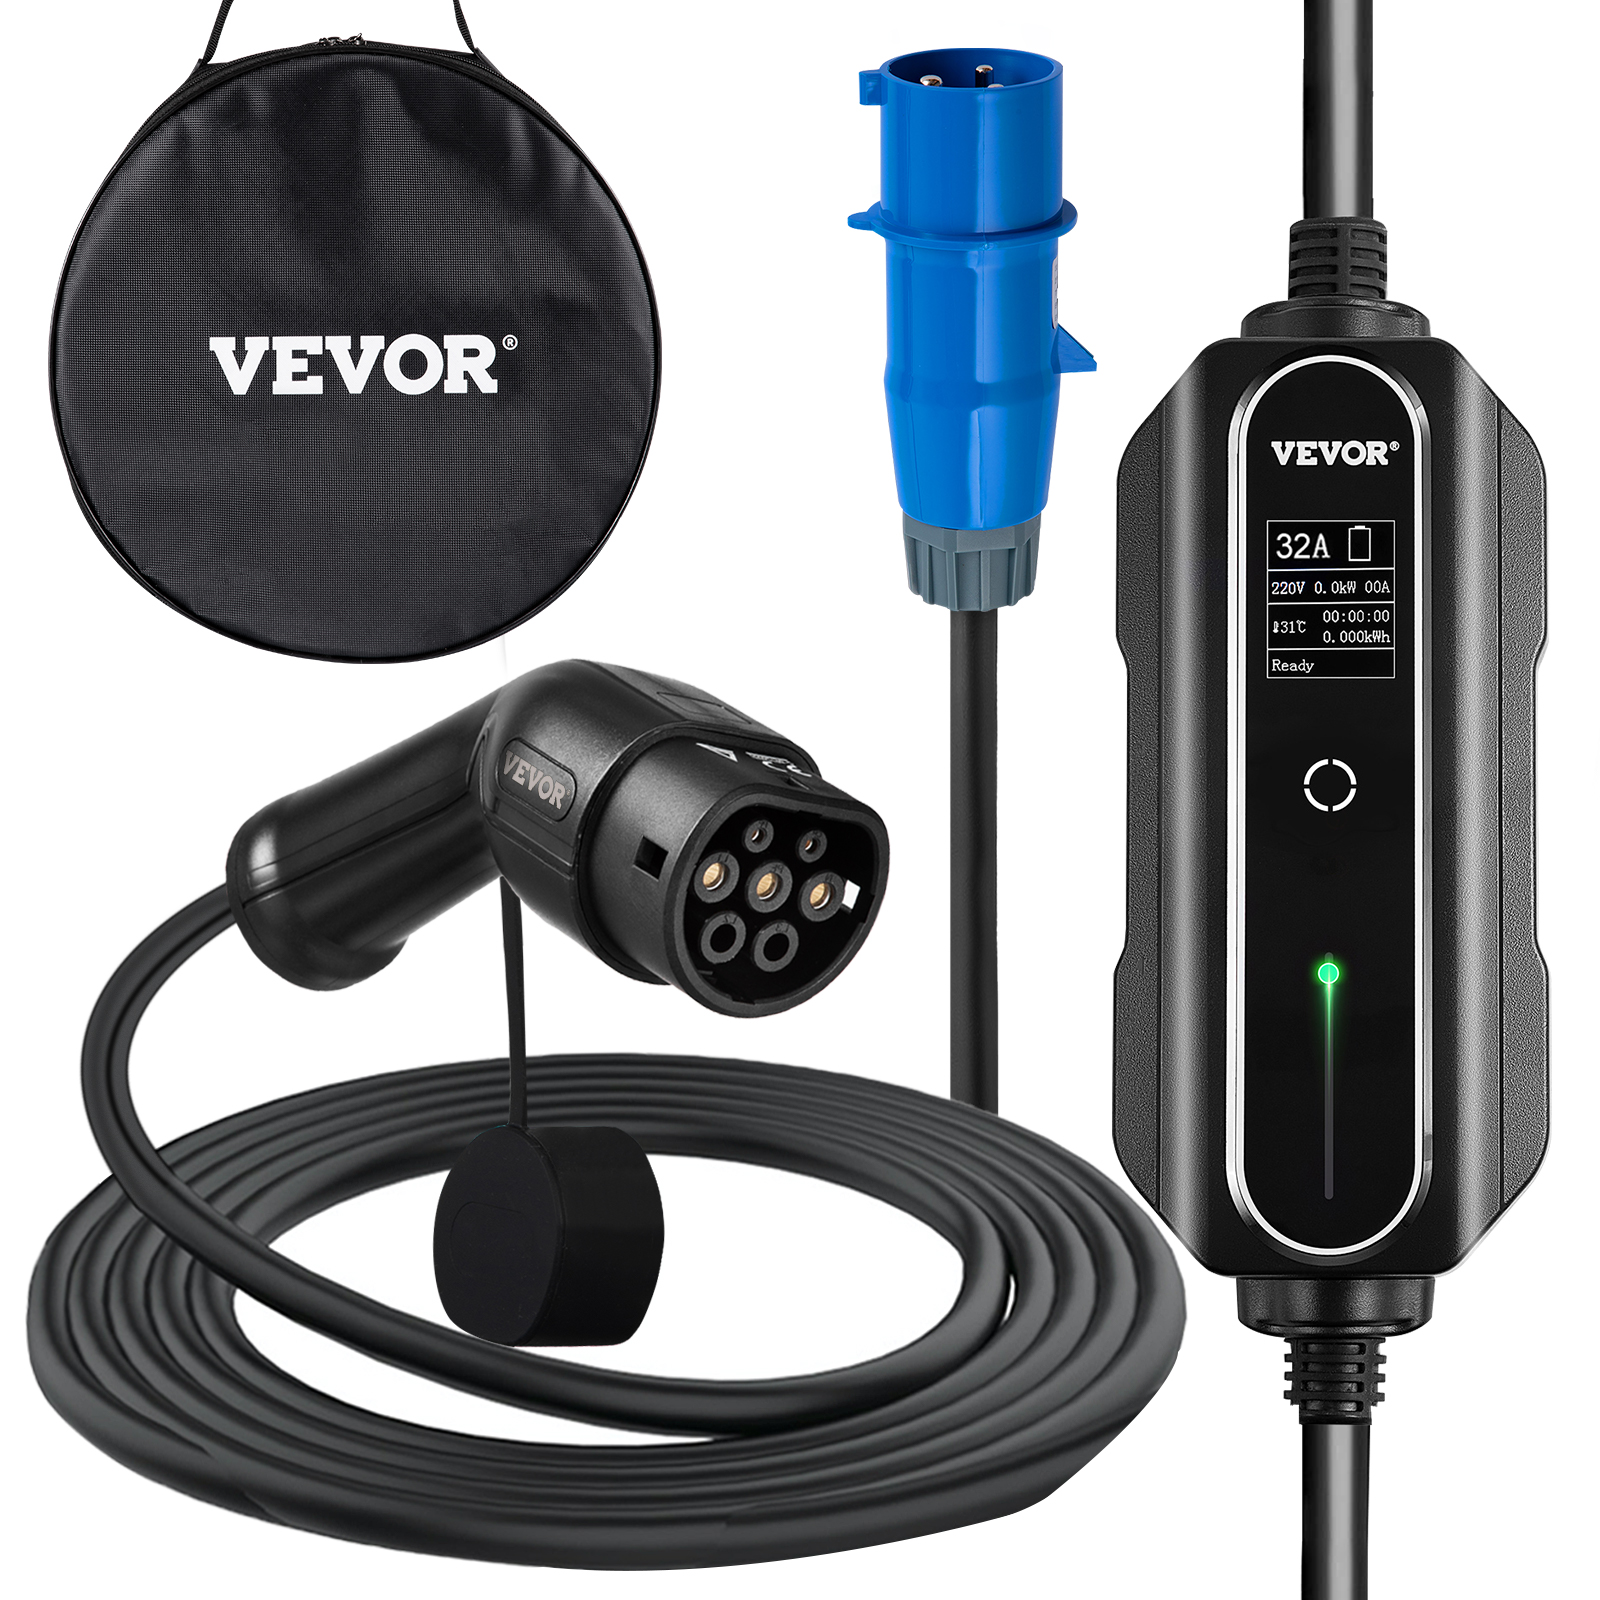 VEVOR VEVOR Portable EV Charger, Type 2 32A, Electric Vehicle Charger 7.5  Metre Charging Cable with CEE 3 Pin Plug, Digital Screen, 7.4 kW WaterProof  IEC 62196-2 Home EV Charging Station with